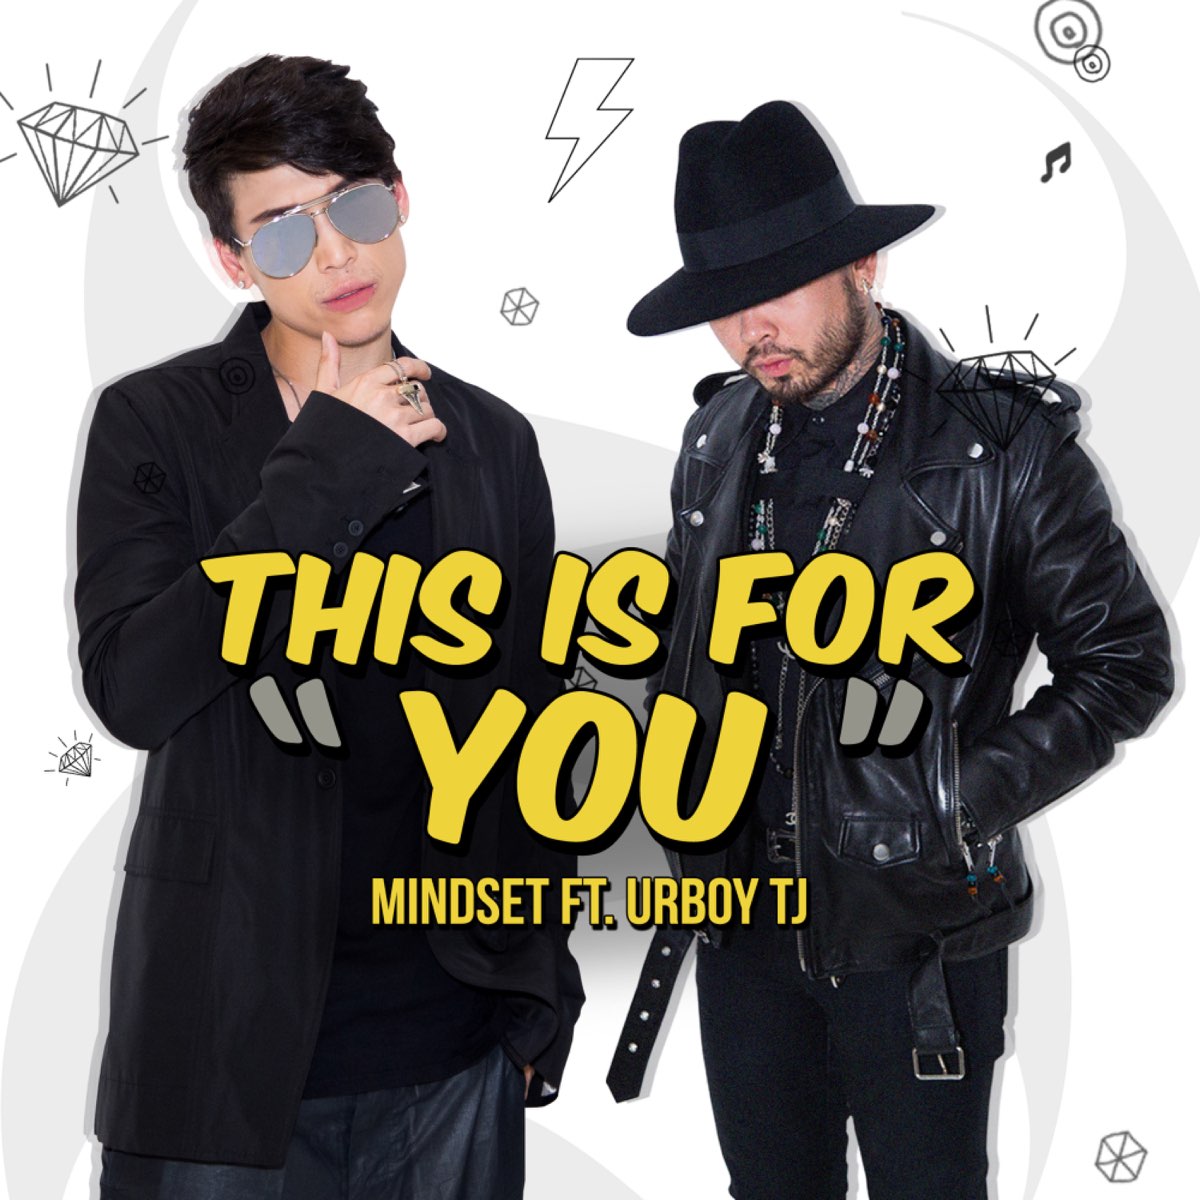 This is for you (feat. UrboyTJ) - Single by POKMINDSET on Apple Music